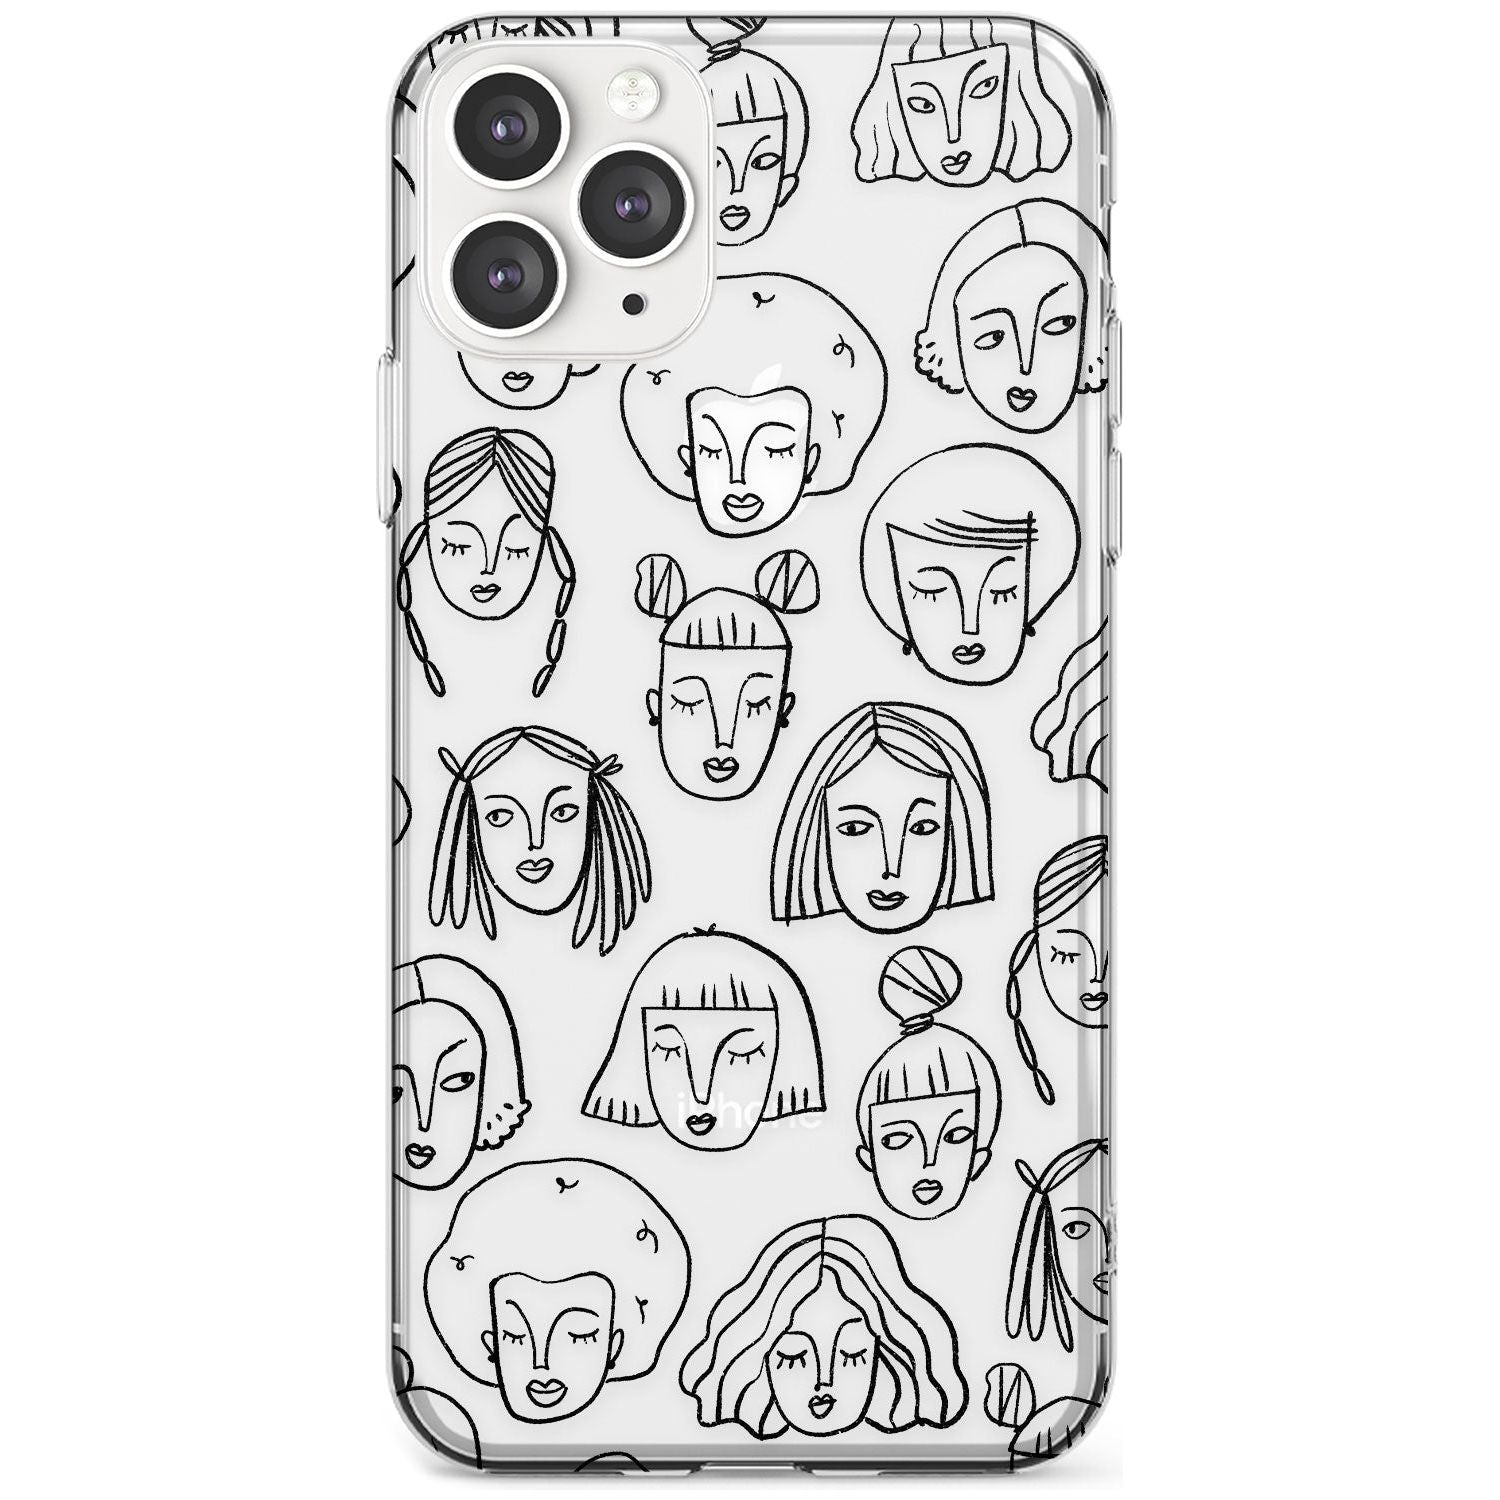 Girl Portrait Doodles Slim TPU Phone Case for iPhone 11 Pro Max